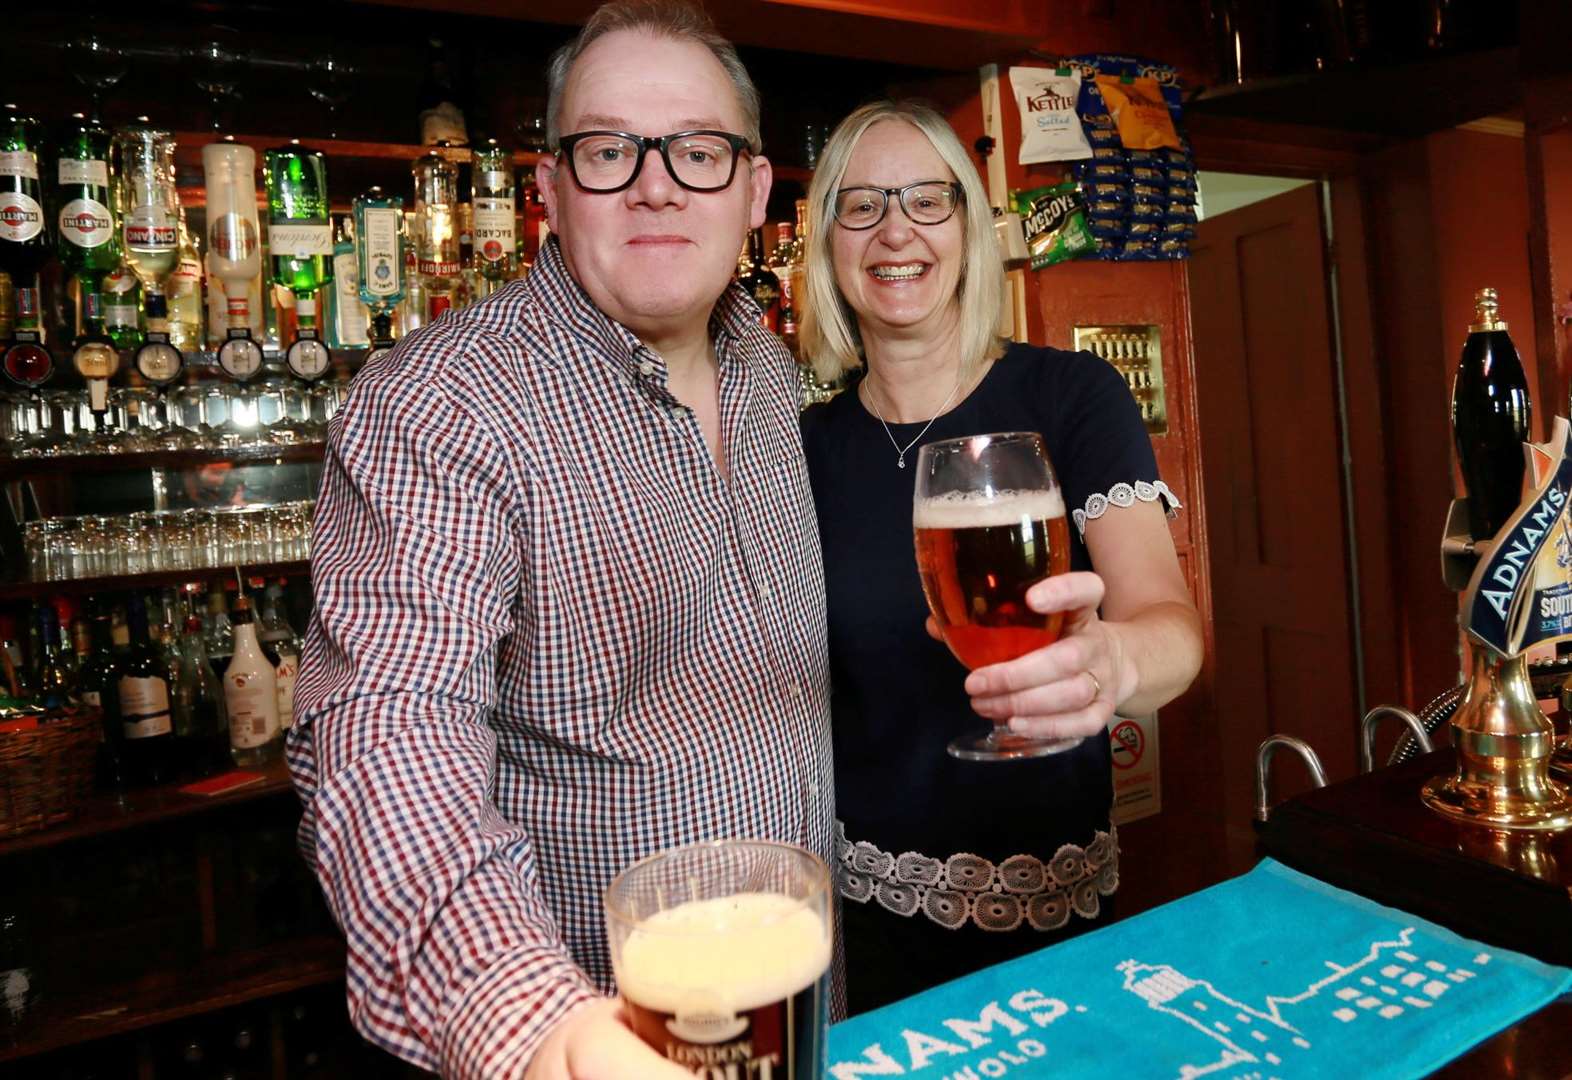 Husband and wife team Chris and Hazel Mitchell have taken over the Red Lion pub in Milstead